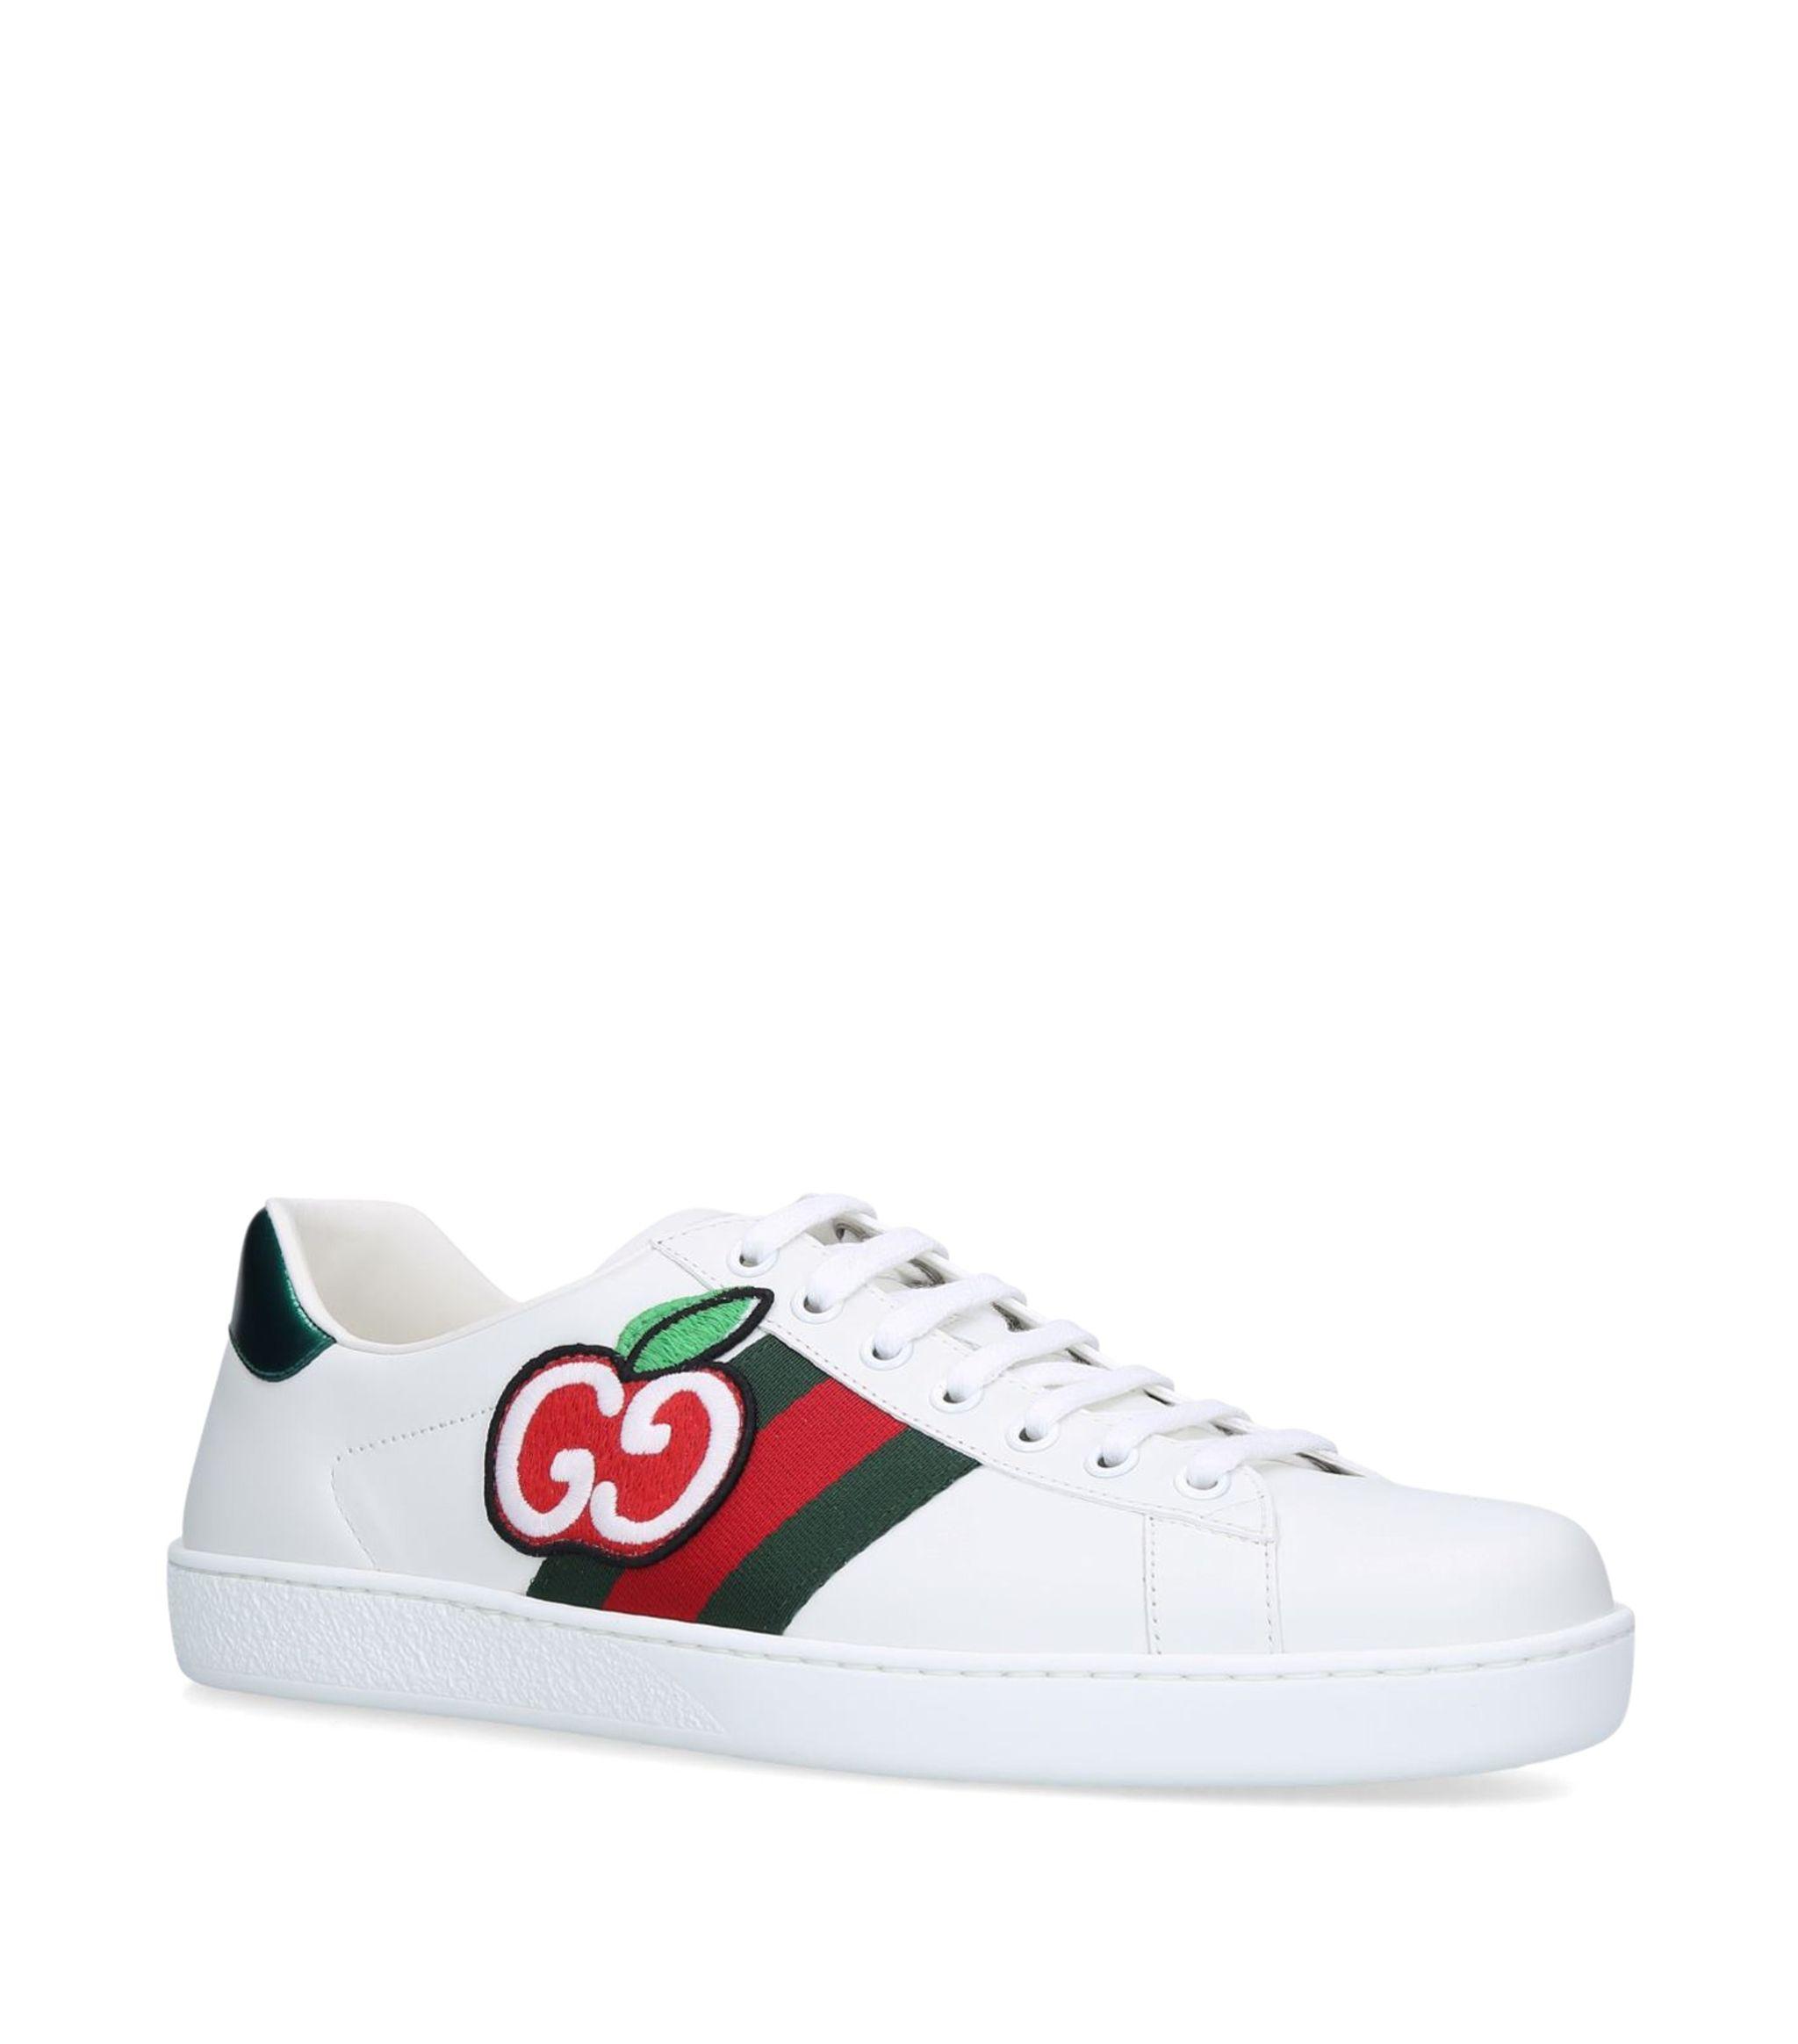 Gucci Leather GG Apple Ace Sneakers in White, Red & Green (White) for ...